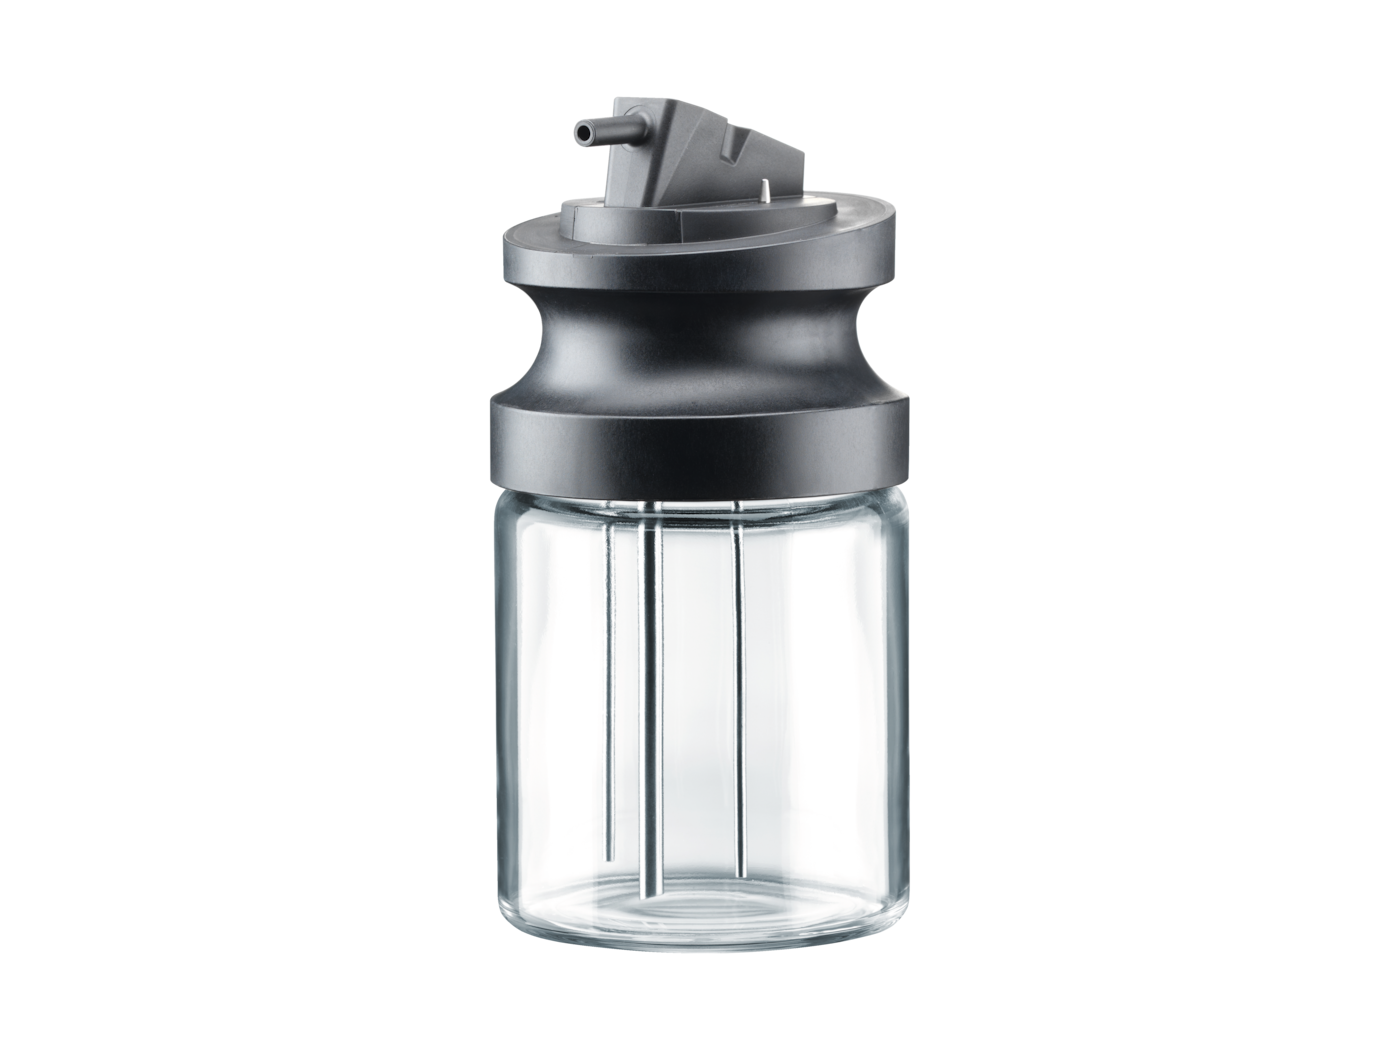 MB-CVA 7000 - Milk container made of glass 